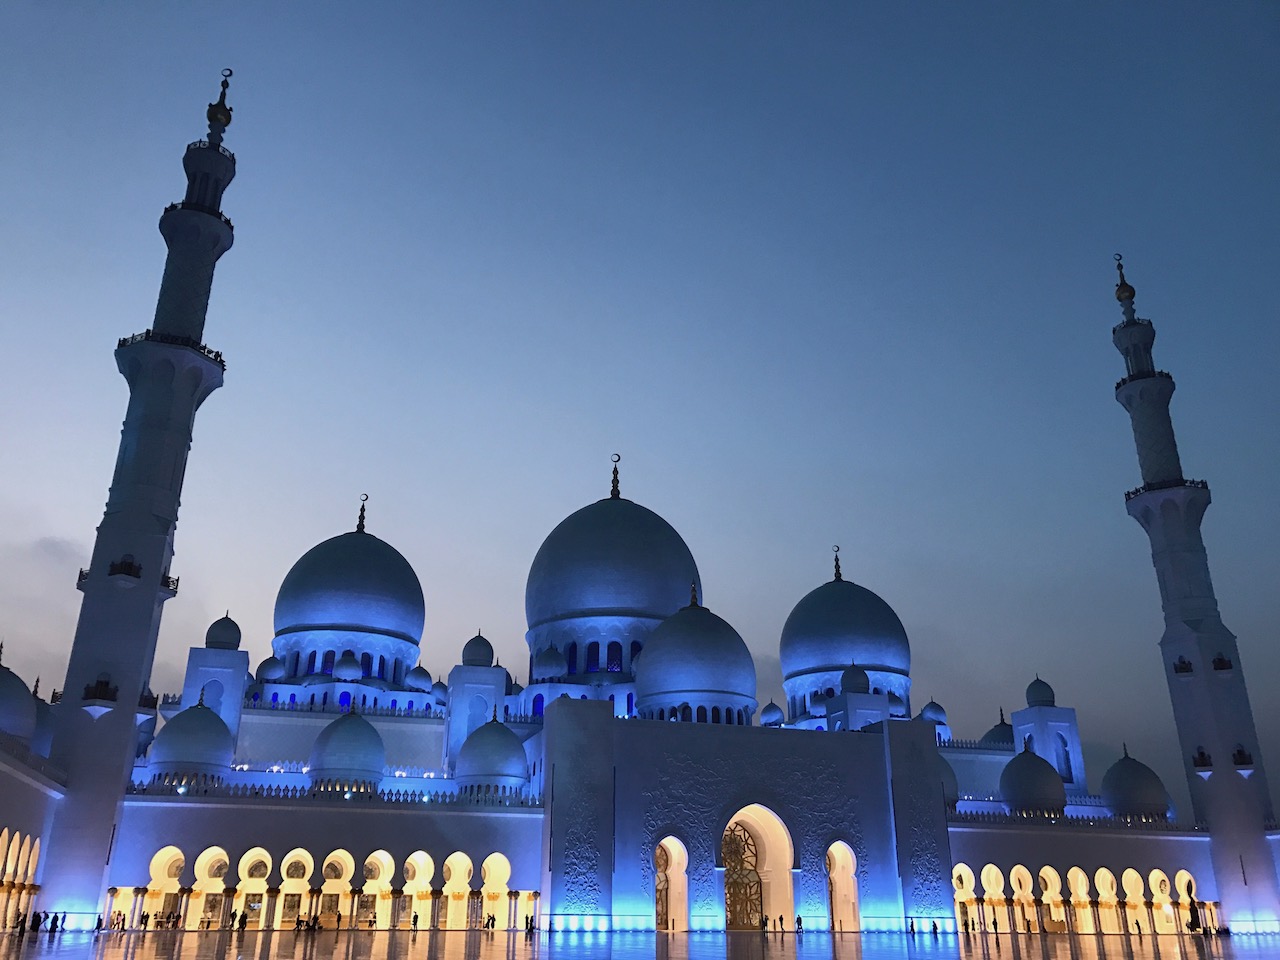 Rant: The Sheikh Zayed Mosque is Completely Overrated